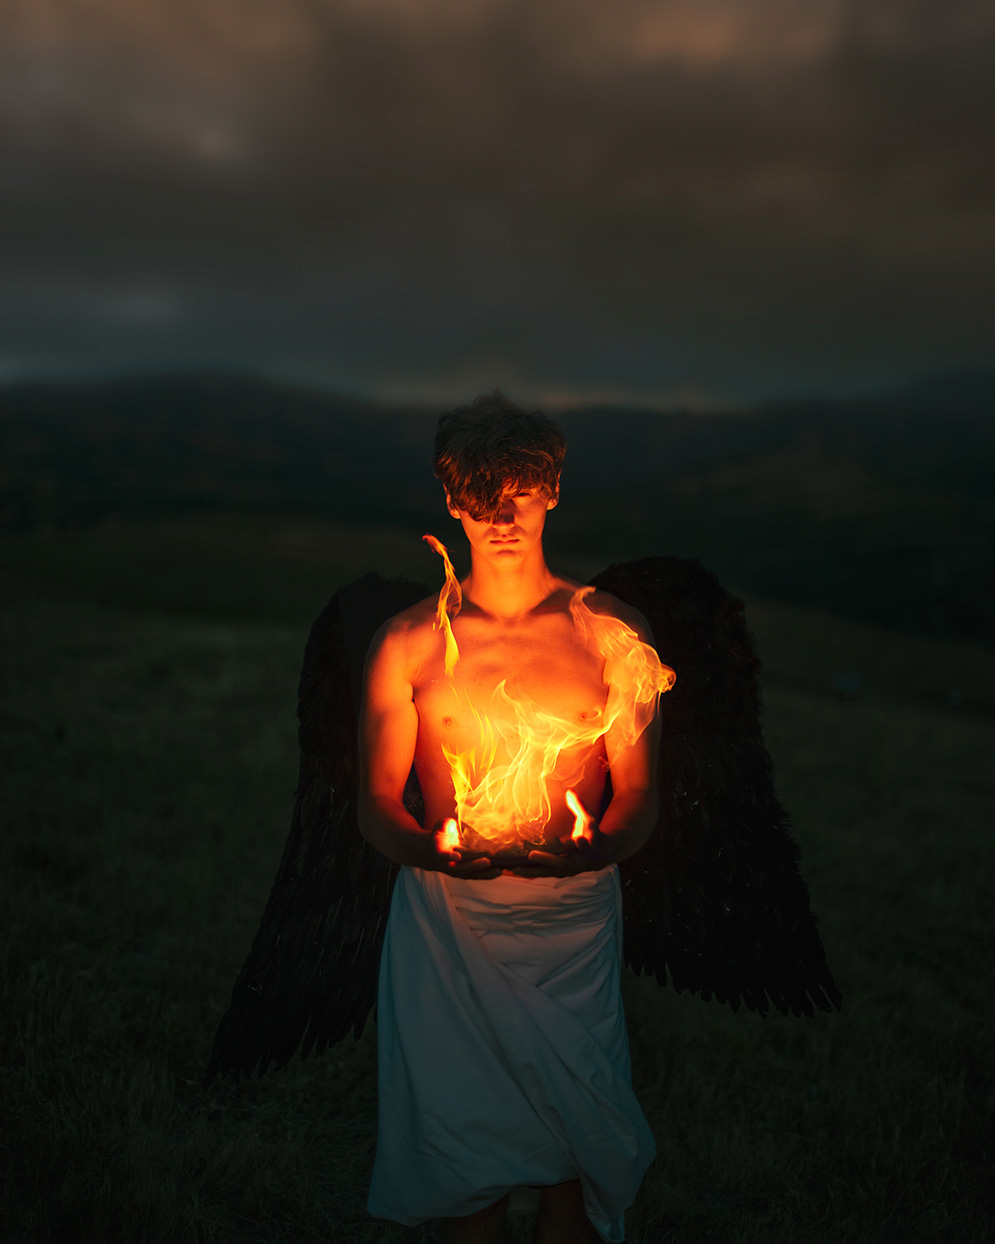 Photograph of a boy with black angel wings standing in a dark, open field holding fire in his hands. The boy is illuminated orange by the glow of the fire.